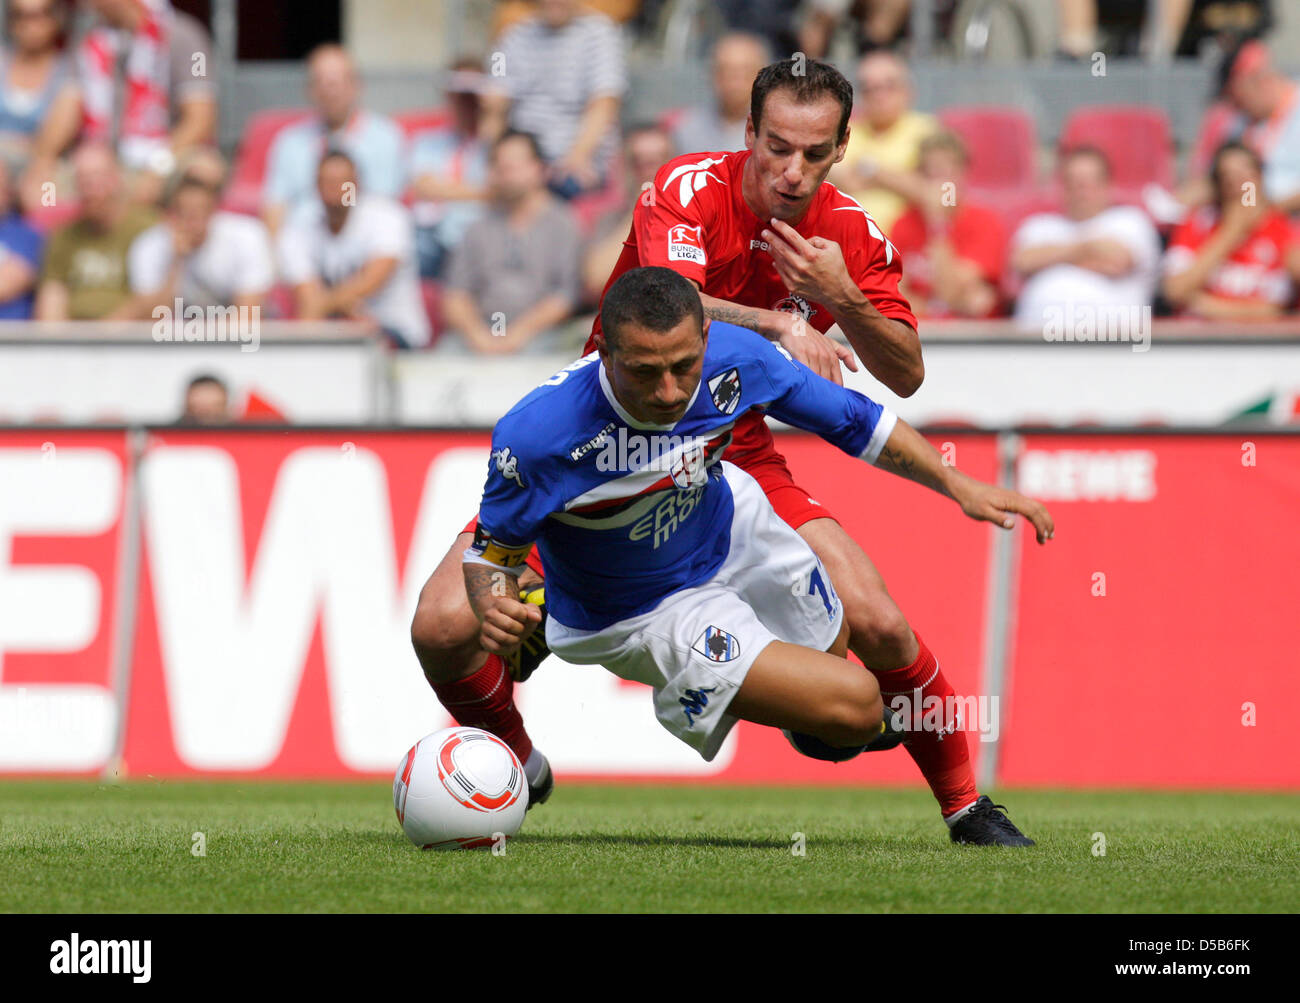 Cologne's Petit (R) tackles Sampdoria's Angelo Palombo (L) during their test match in Cologne, Germany, 07 August 2010. Photo: ROLF VENNENBERND Stock Photo